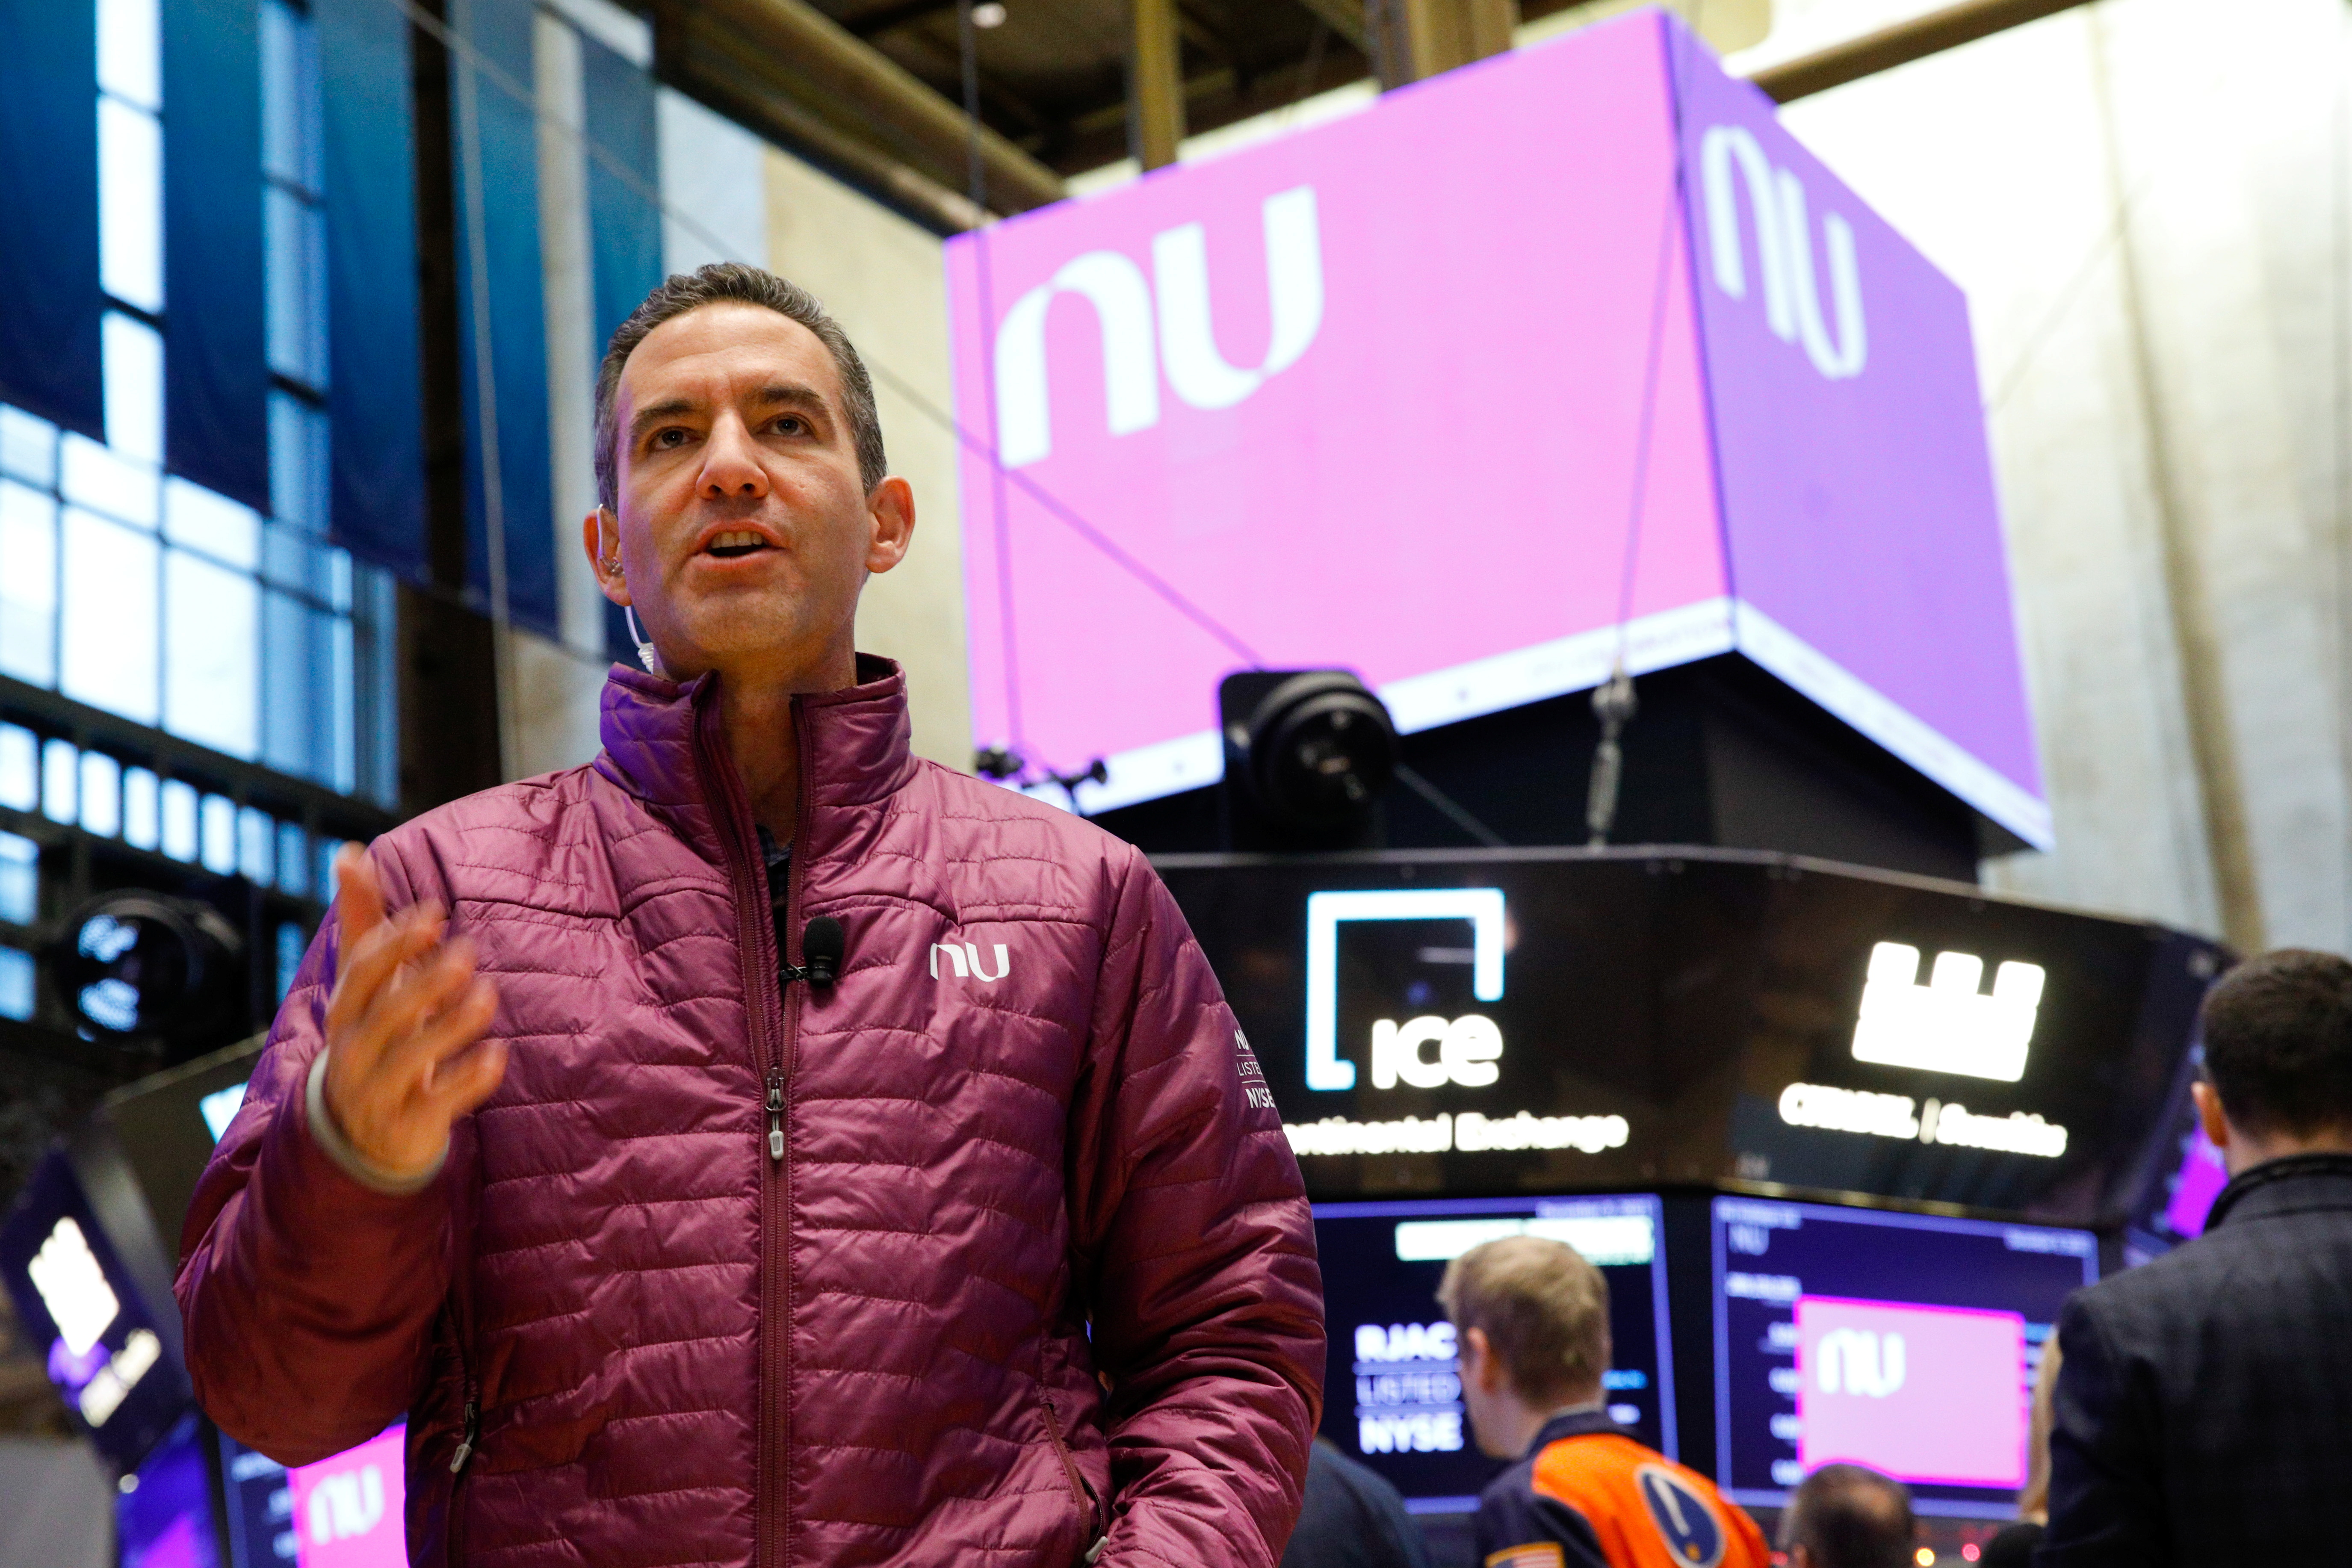 David Velez, Founder and CEO of Nubank gives an interview on the floor of the New York Stock Exchange